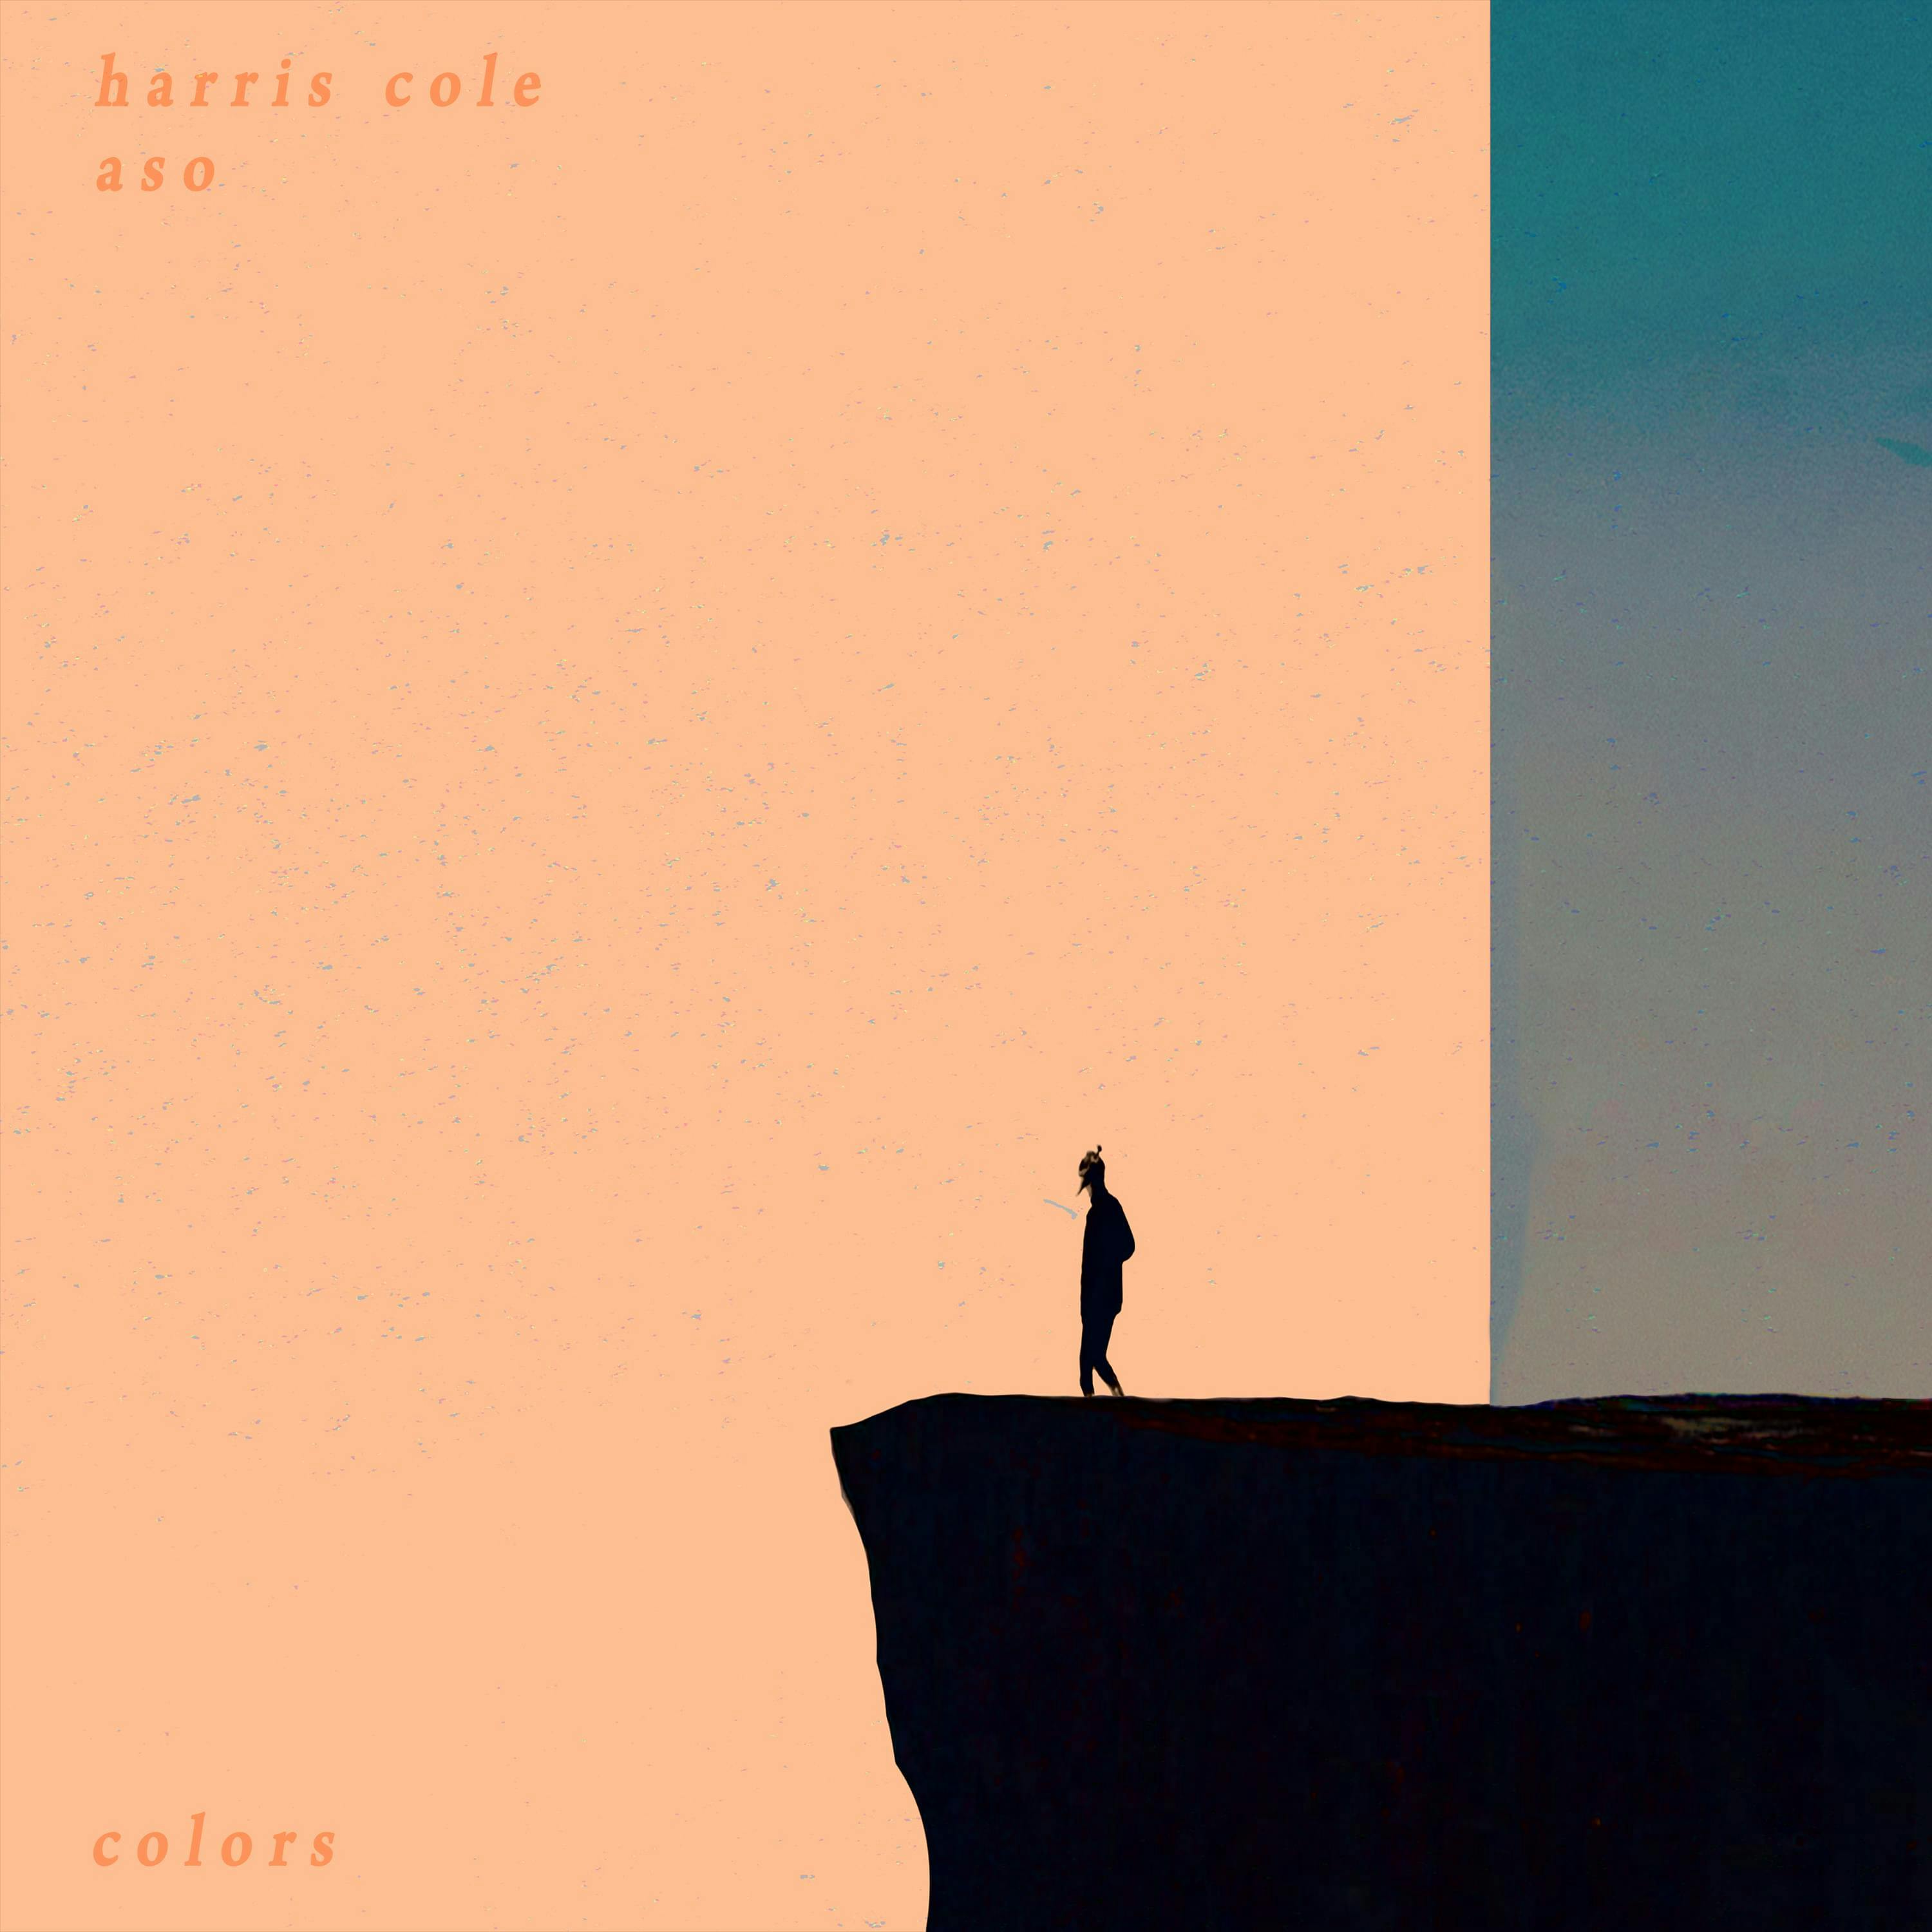 Cover art for harris cole's song: safe, now (w/ aso)